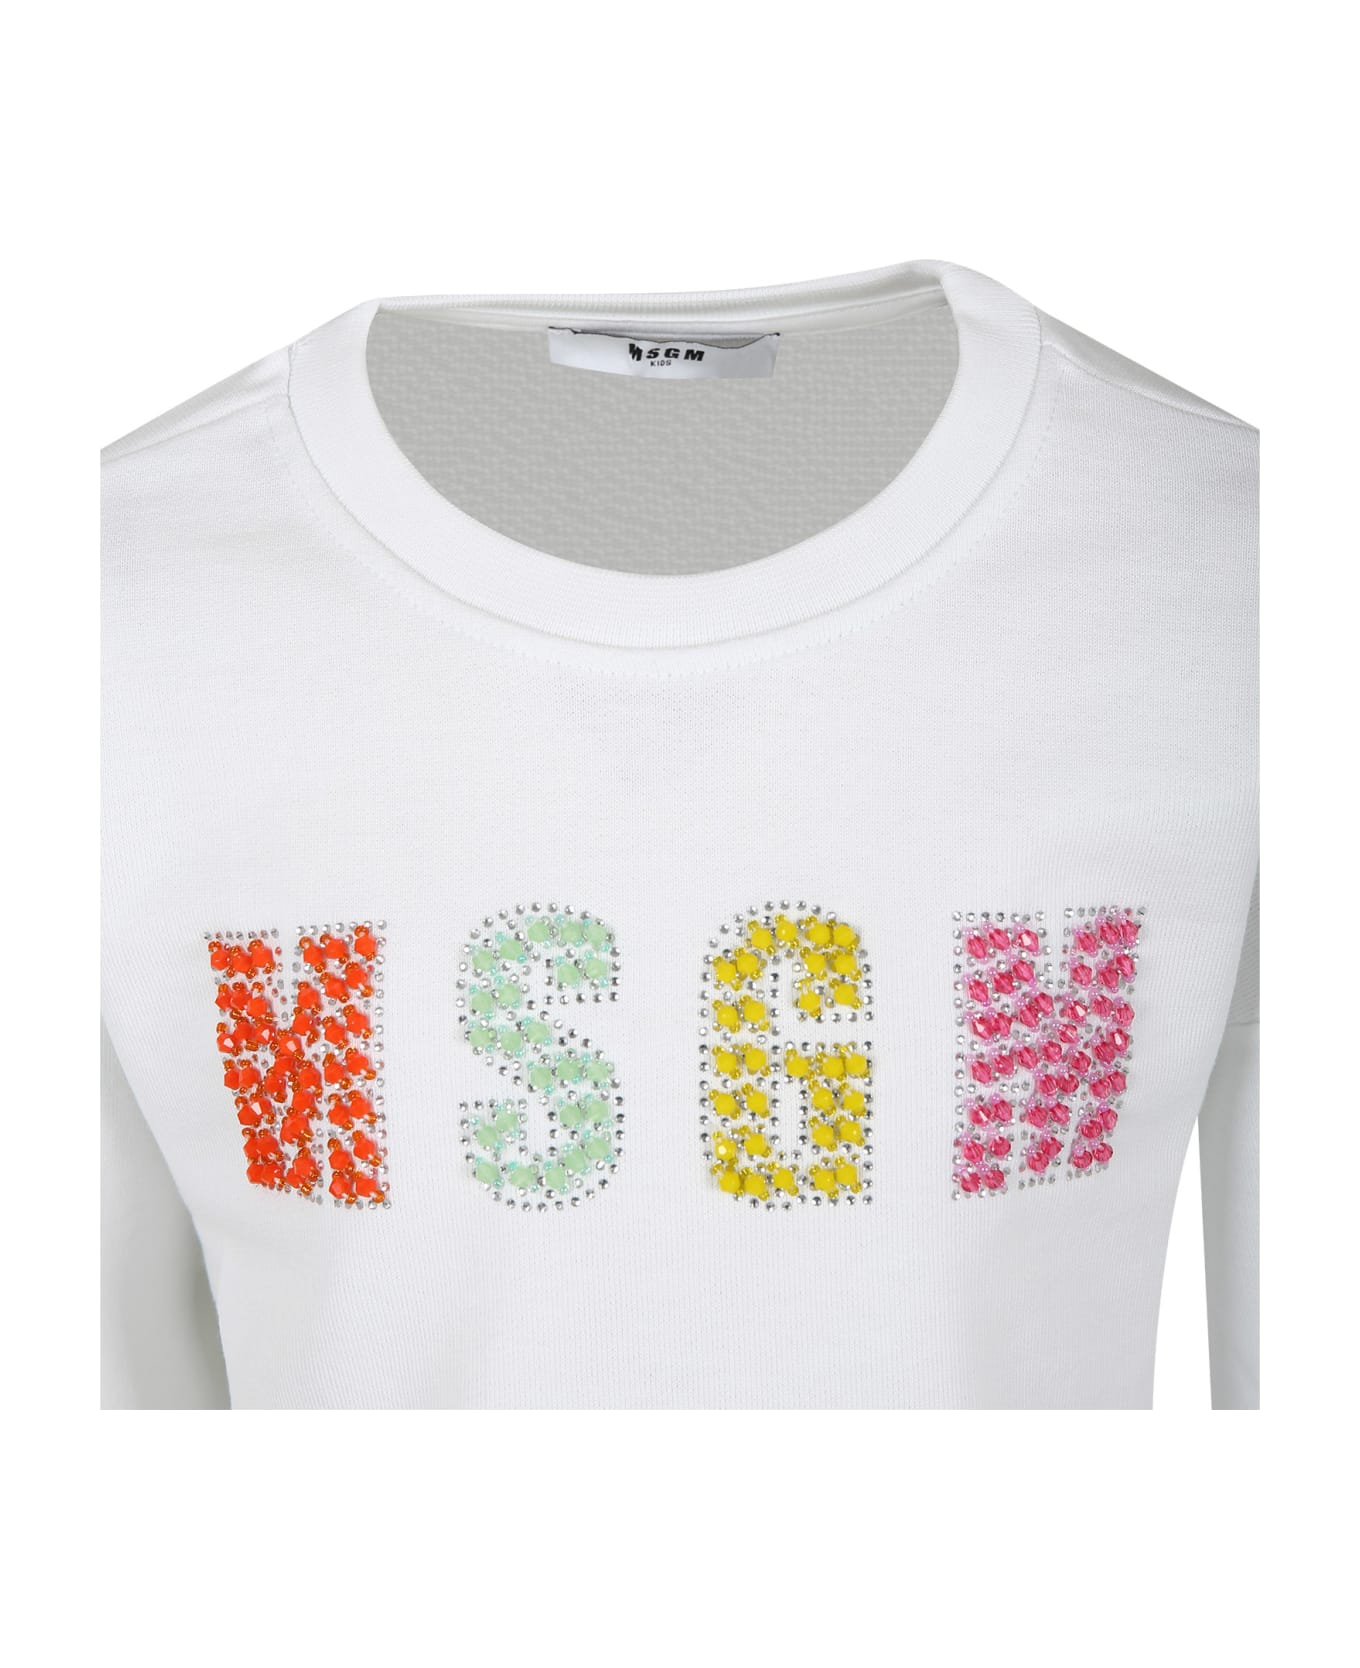 MSGM White Sweatshirt For Girl With Rhinestones And Multicolor Stones - White